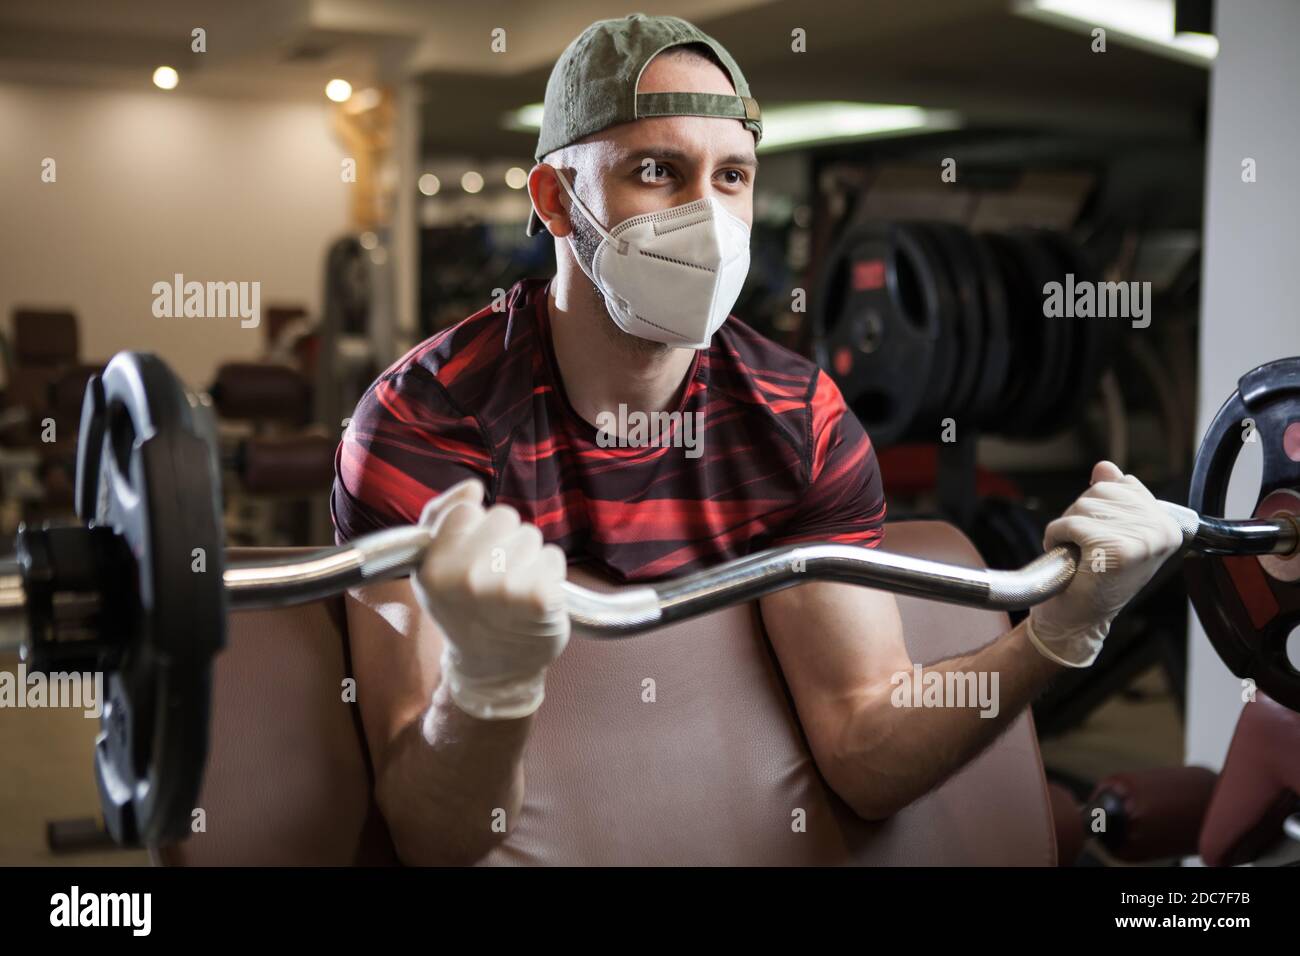 Young caucasian man working out in an indoor gym, barbell bicep curl exercise, wearing protective face mask, sport & fitness during COVID-19 pandemic, Stock Photo